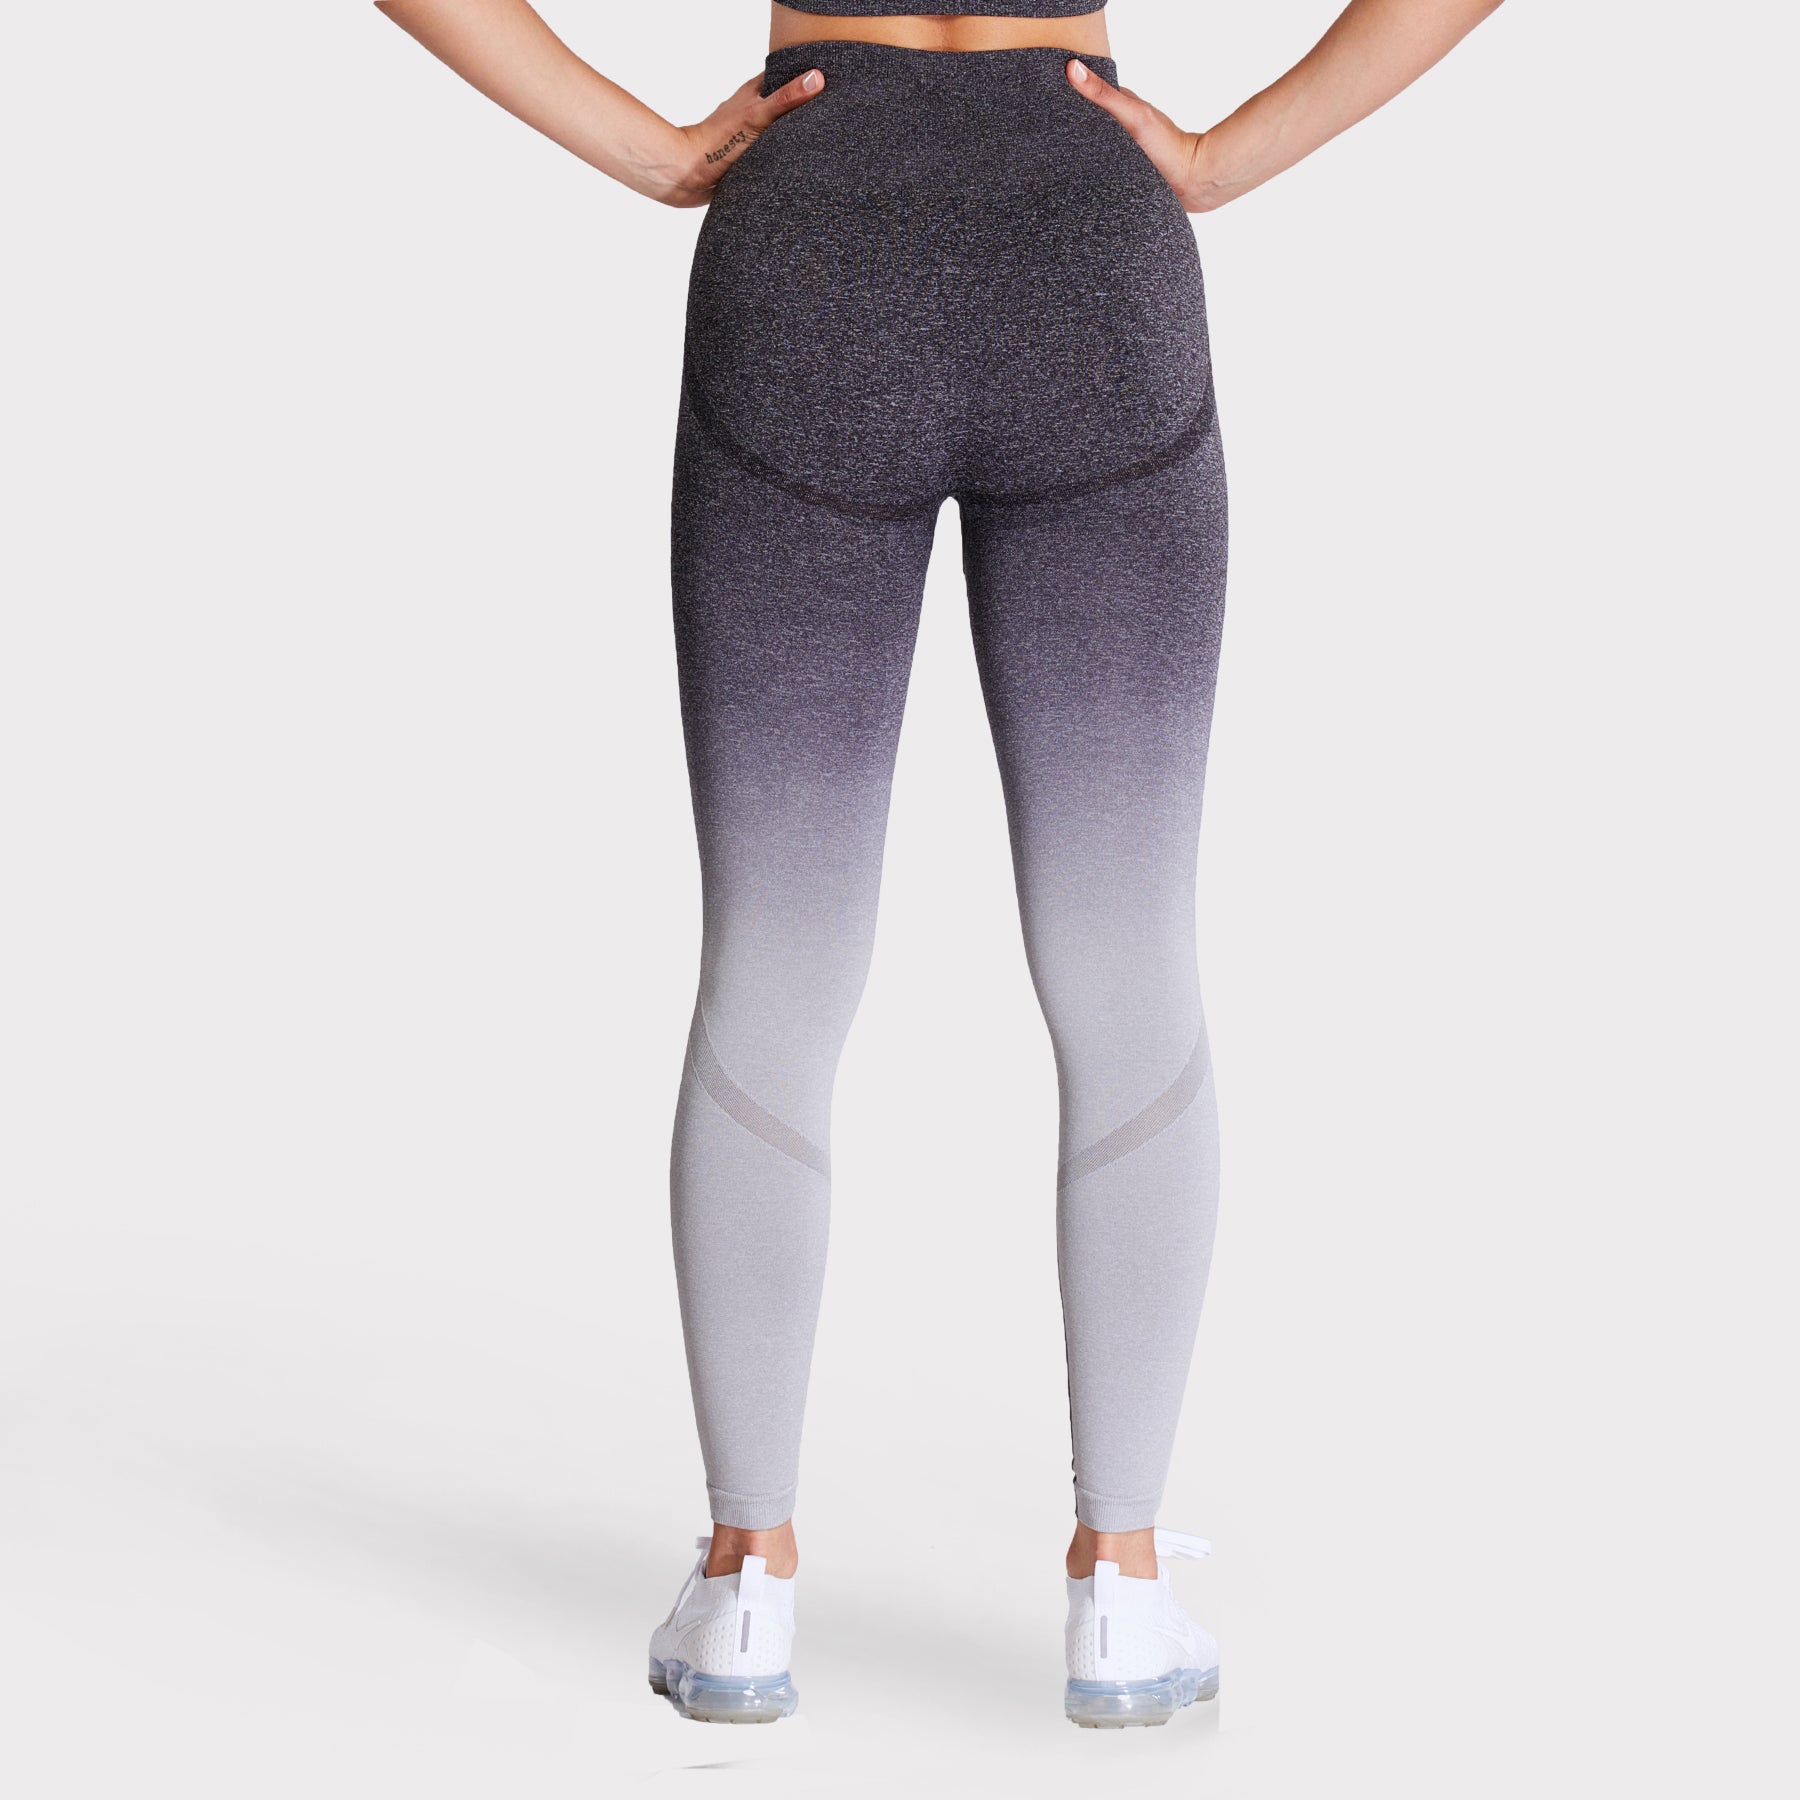 Ombre Seamless Yoga Seamless Workout Leggings And Pants Set Womens